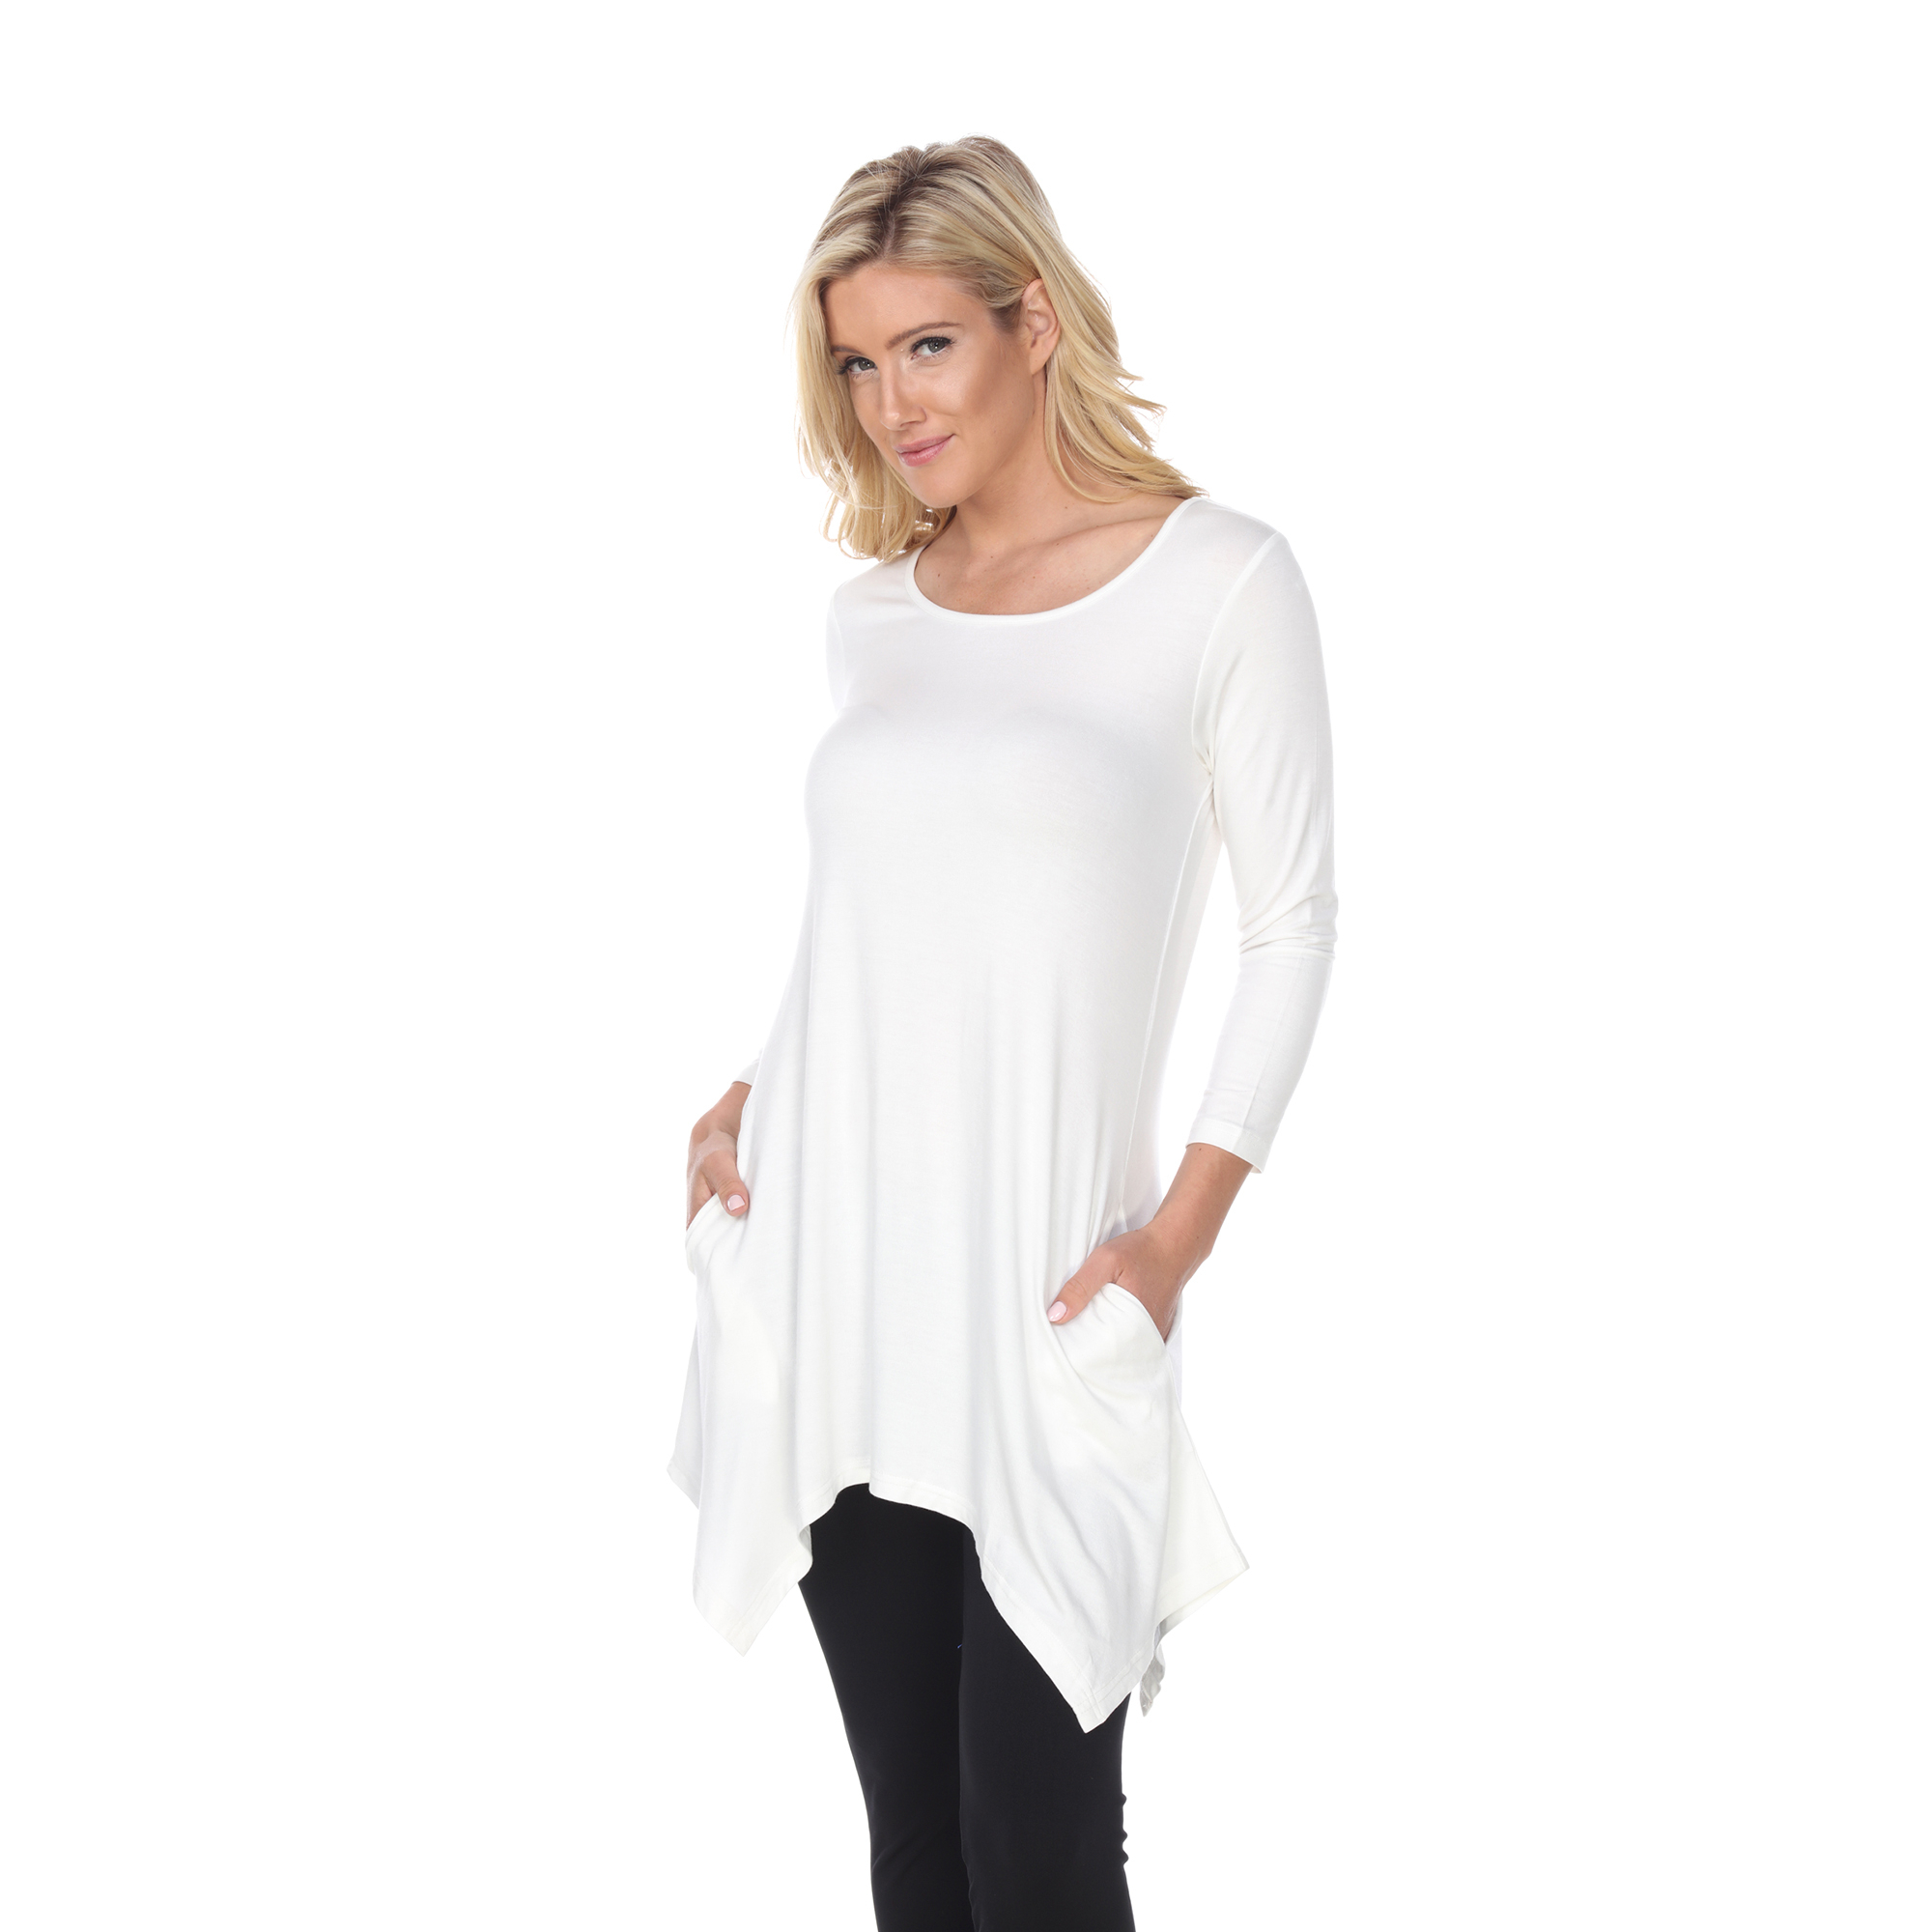 White Mark Women's Quarter Sleeve Tunic Top With Pockets - White, Small